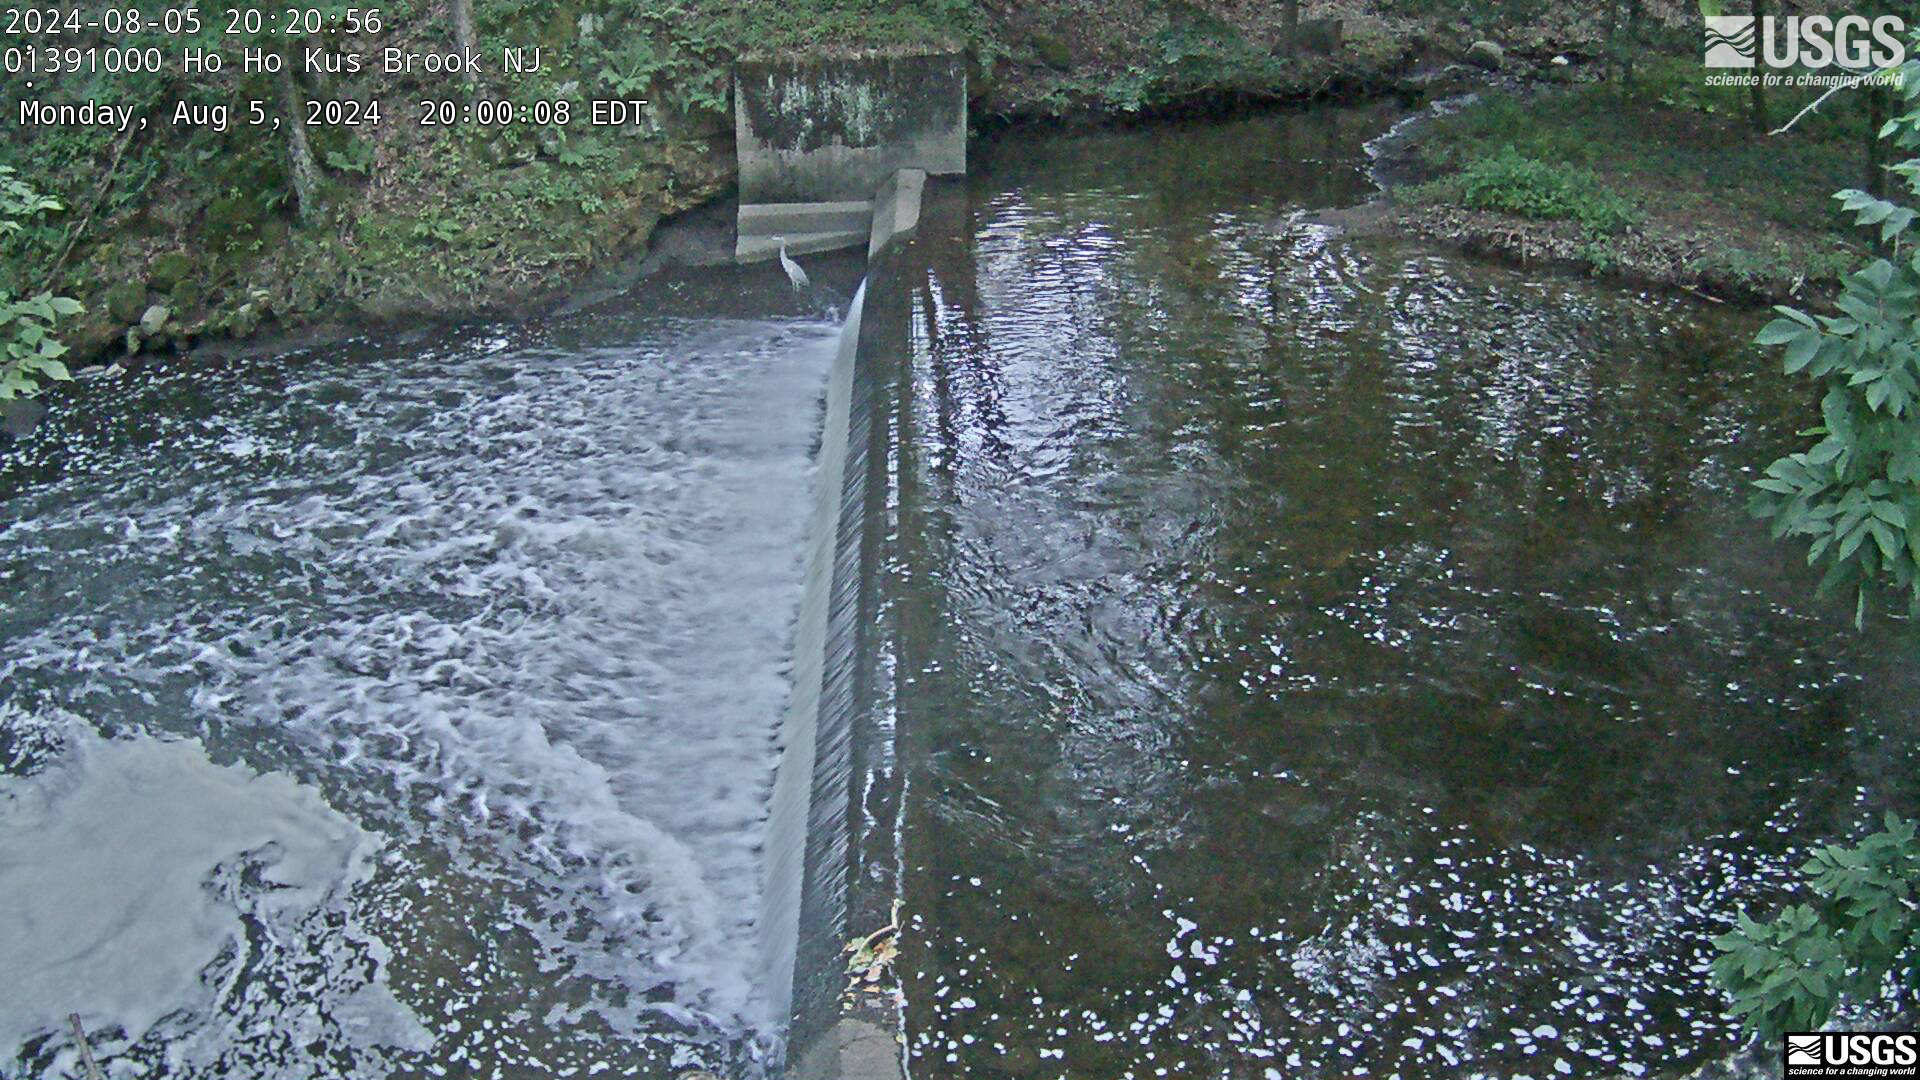 View of the Weir at Hohokus Brook